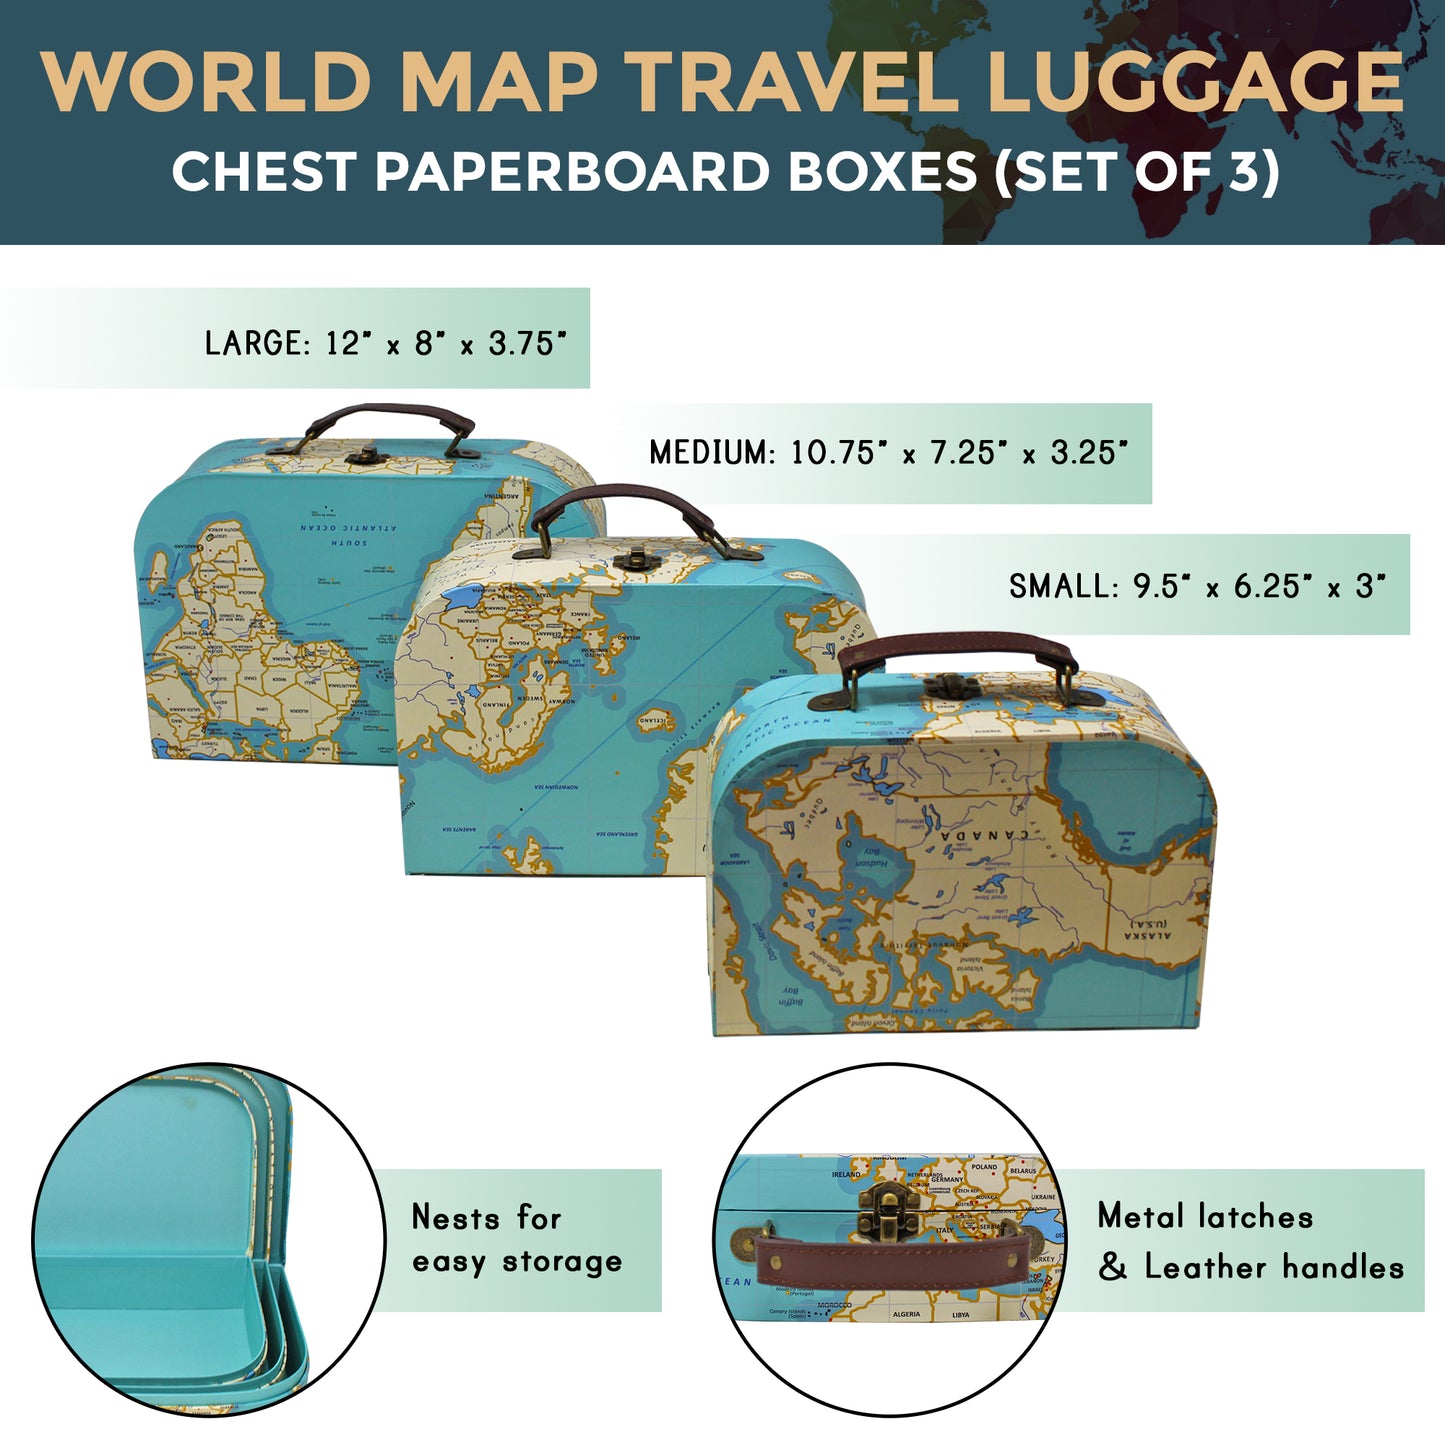 World Map Luggage Chests - 3 Sizes (3 Pack)